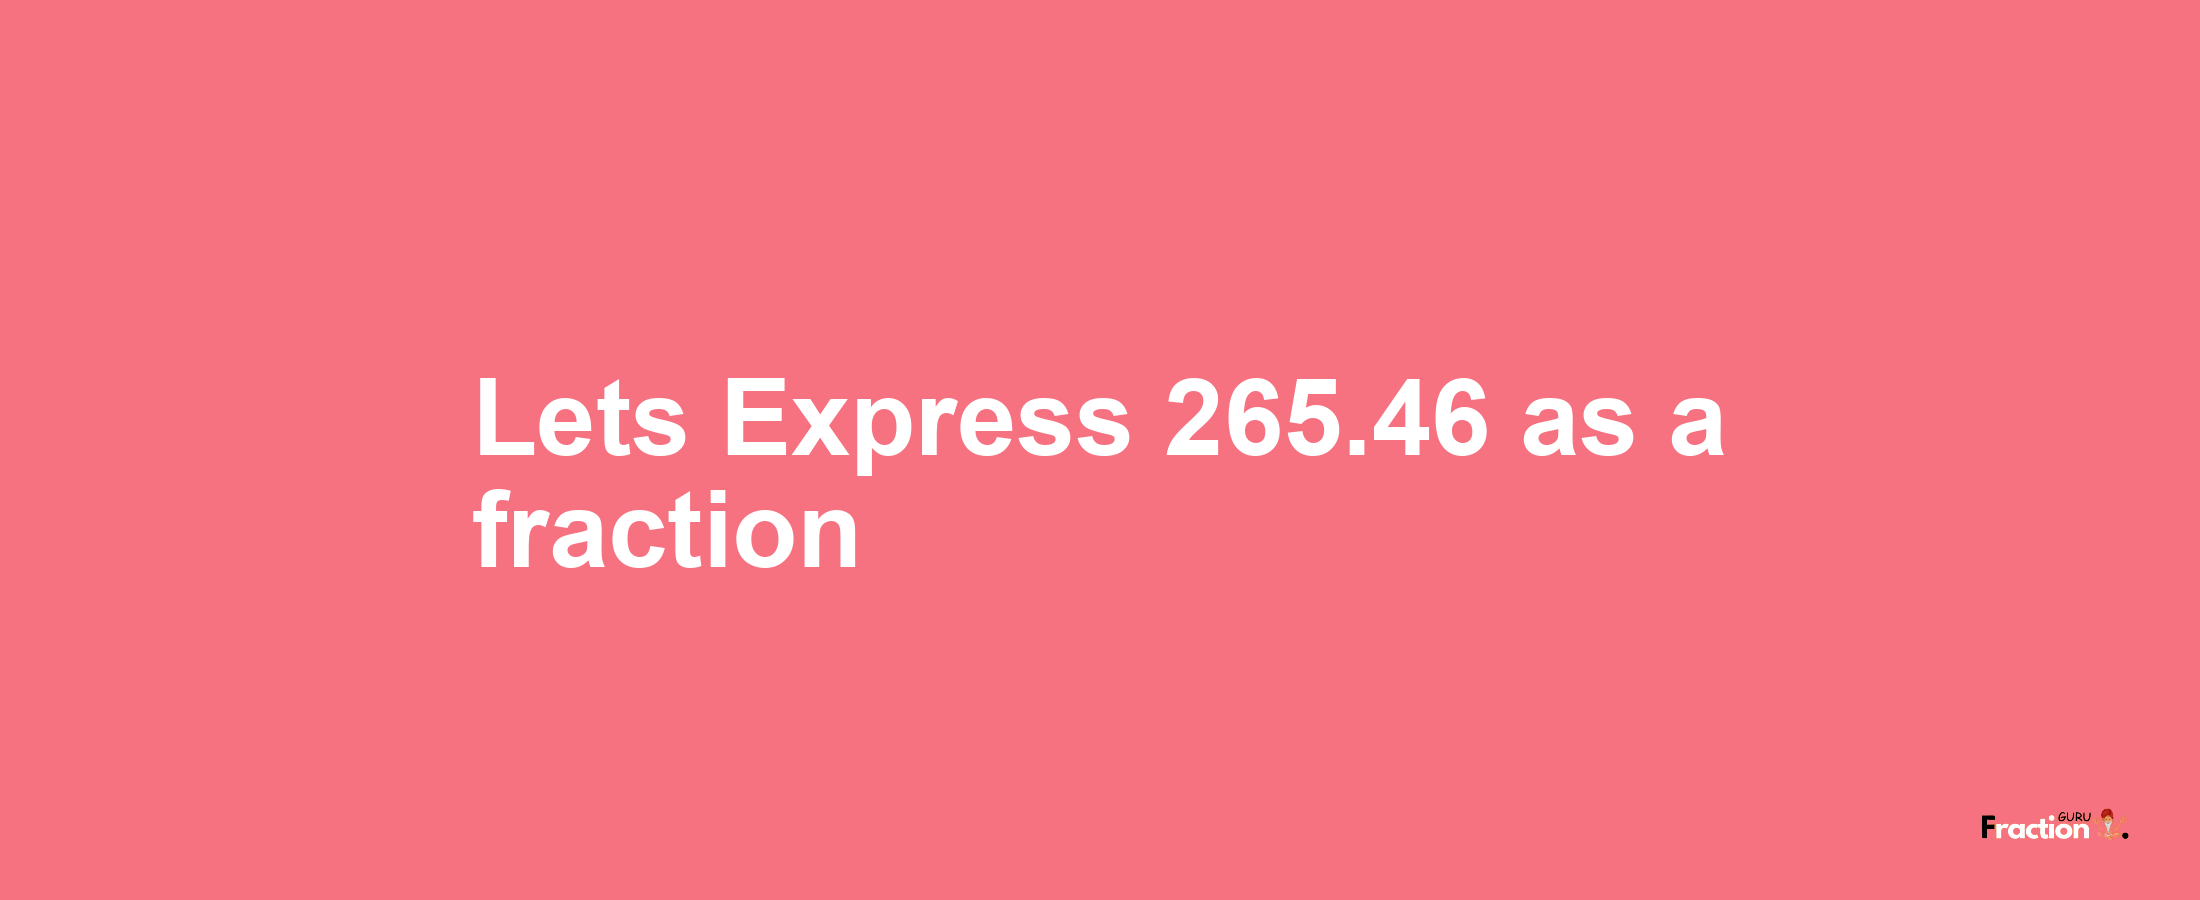 Lets Express 265.46 as afraction